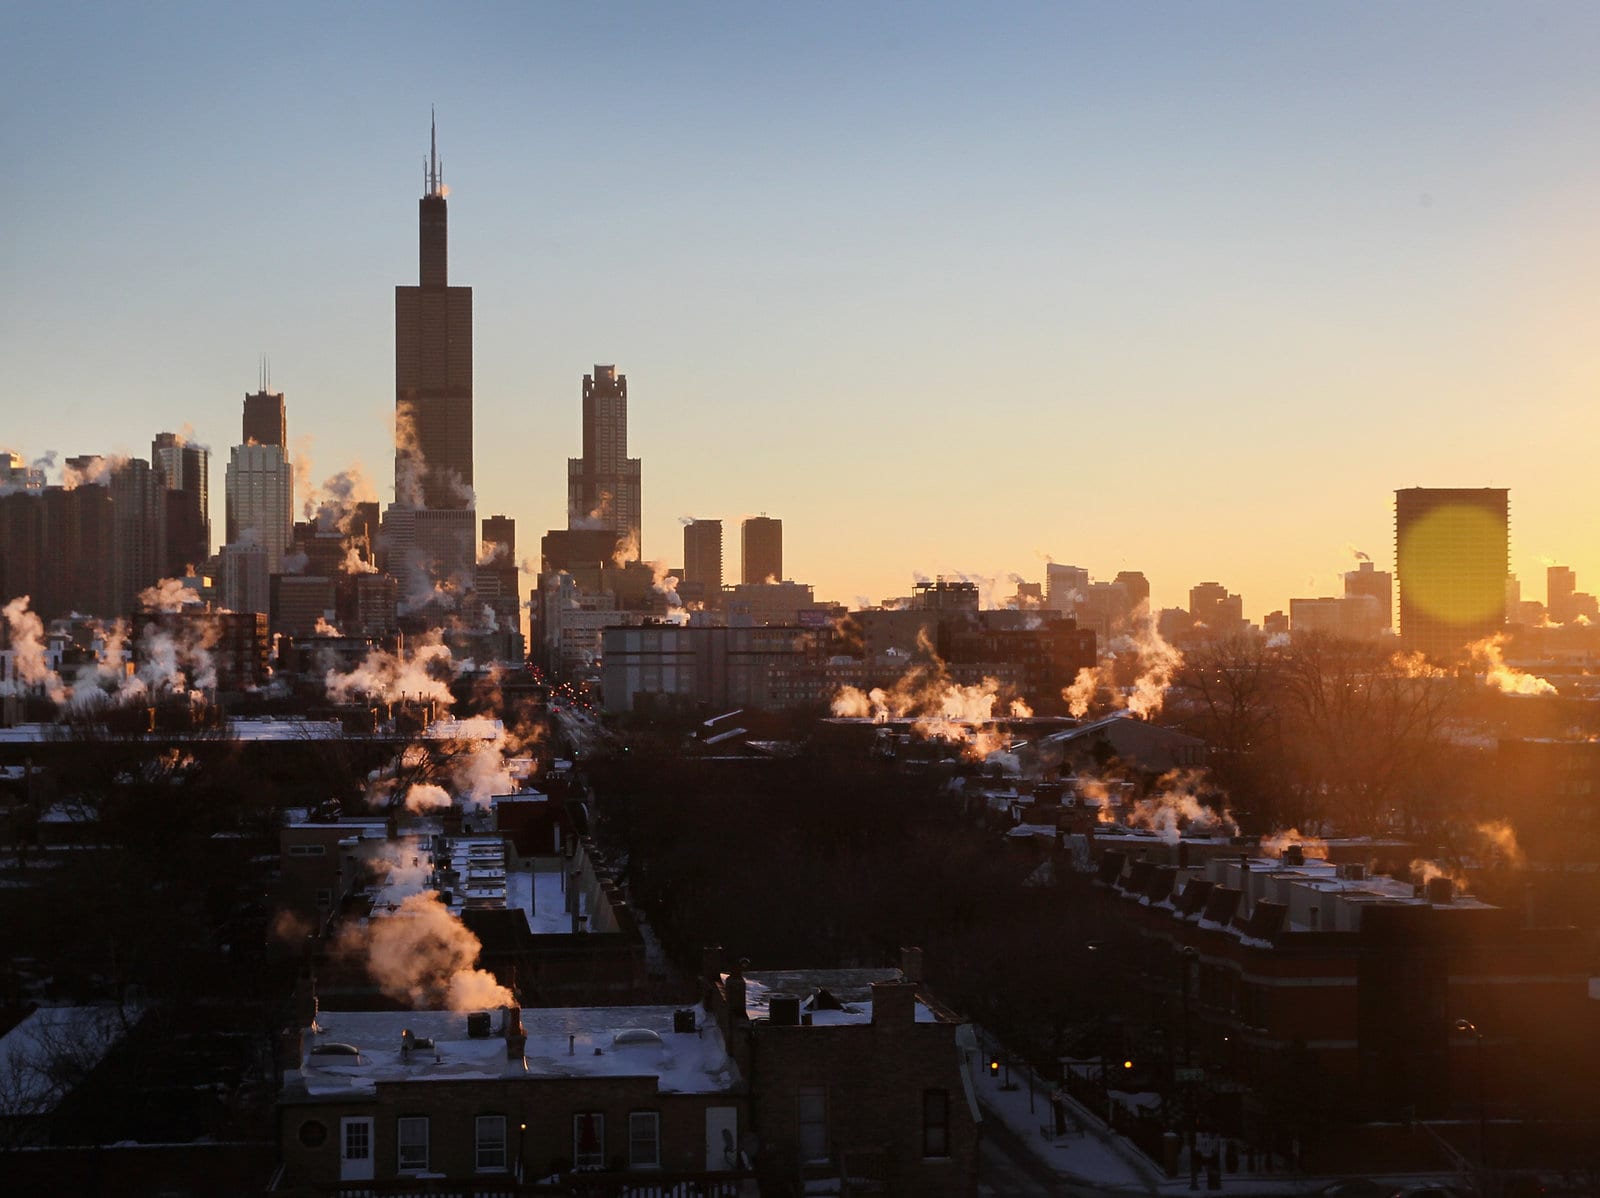 Downtown chicago during sunrise. Photo by Scott Olson-Getty Images